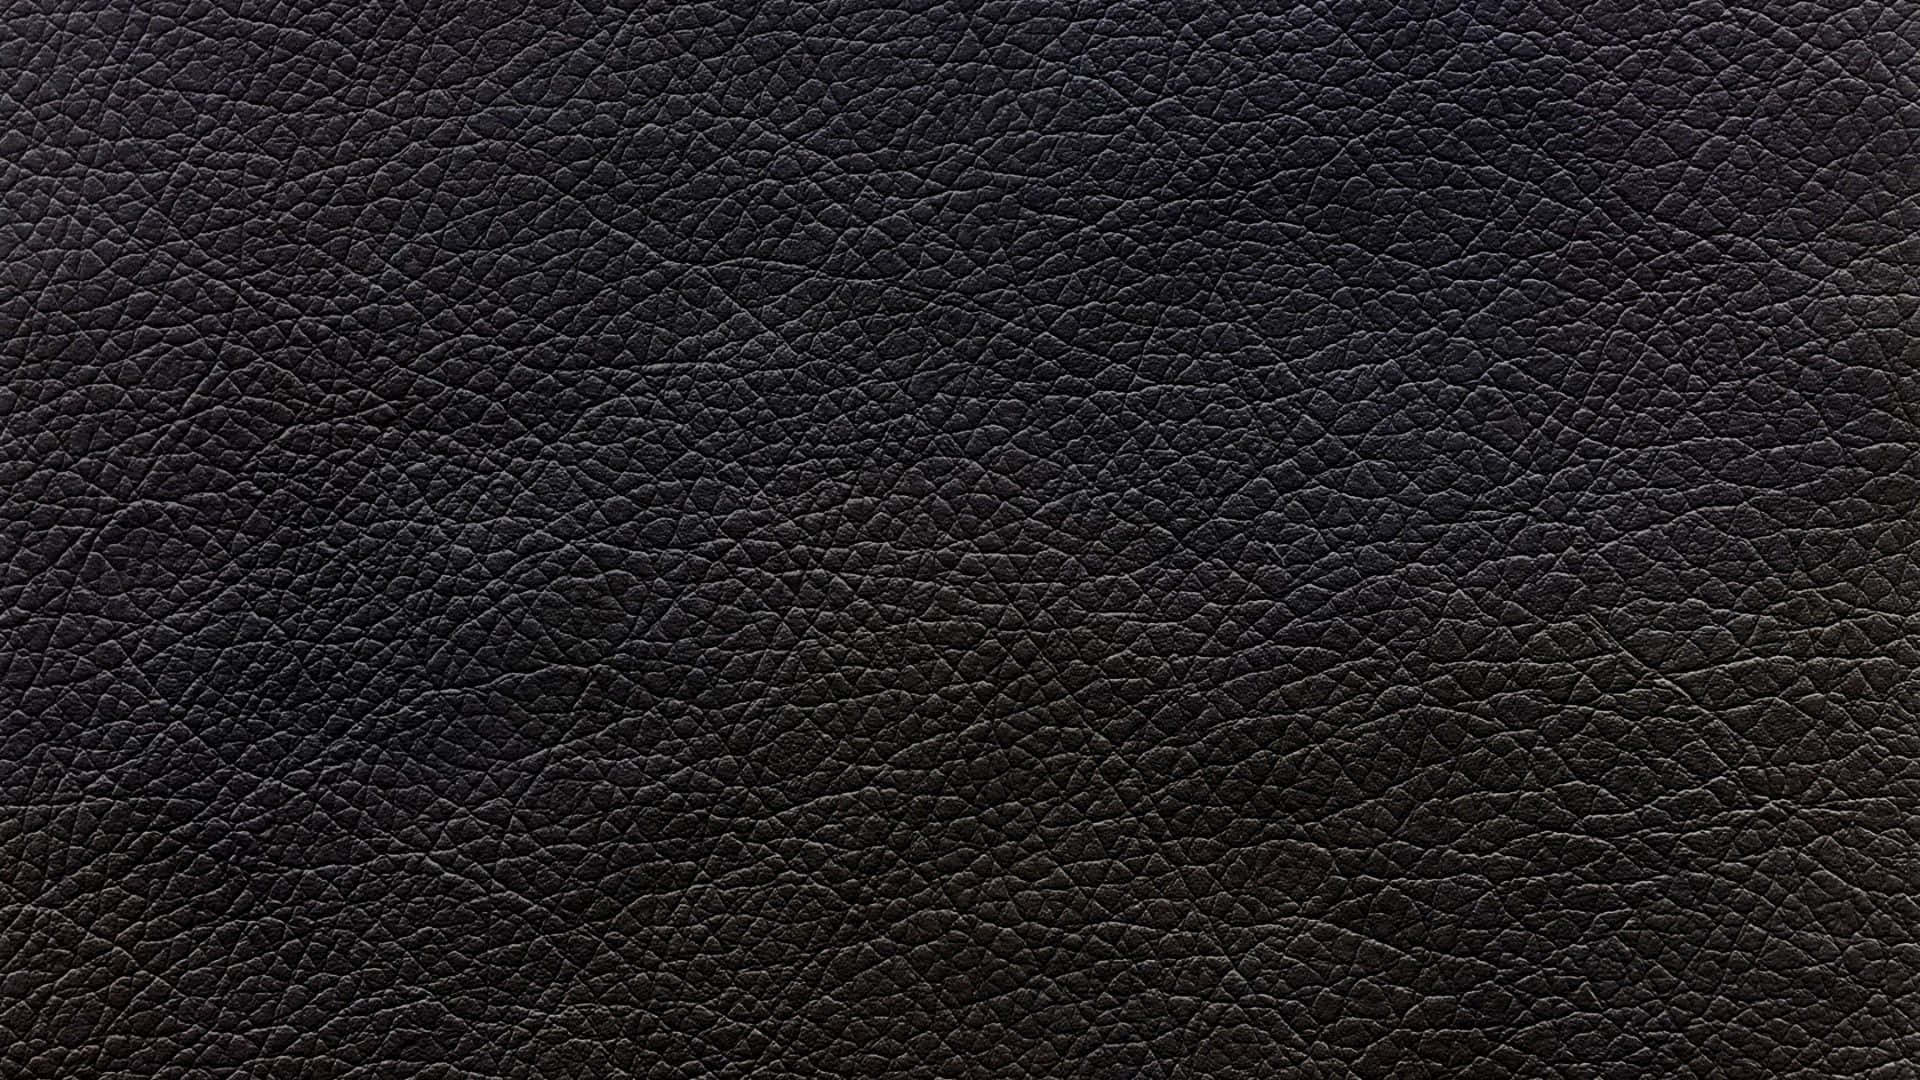 Luxurious Leather Texture - High Resolution Wallpaper